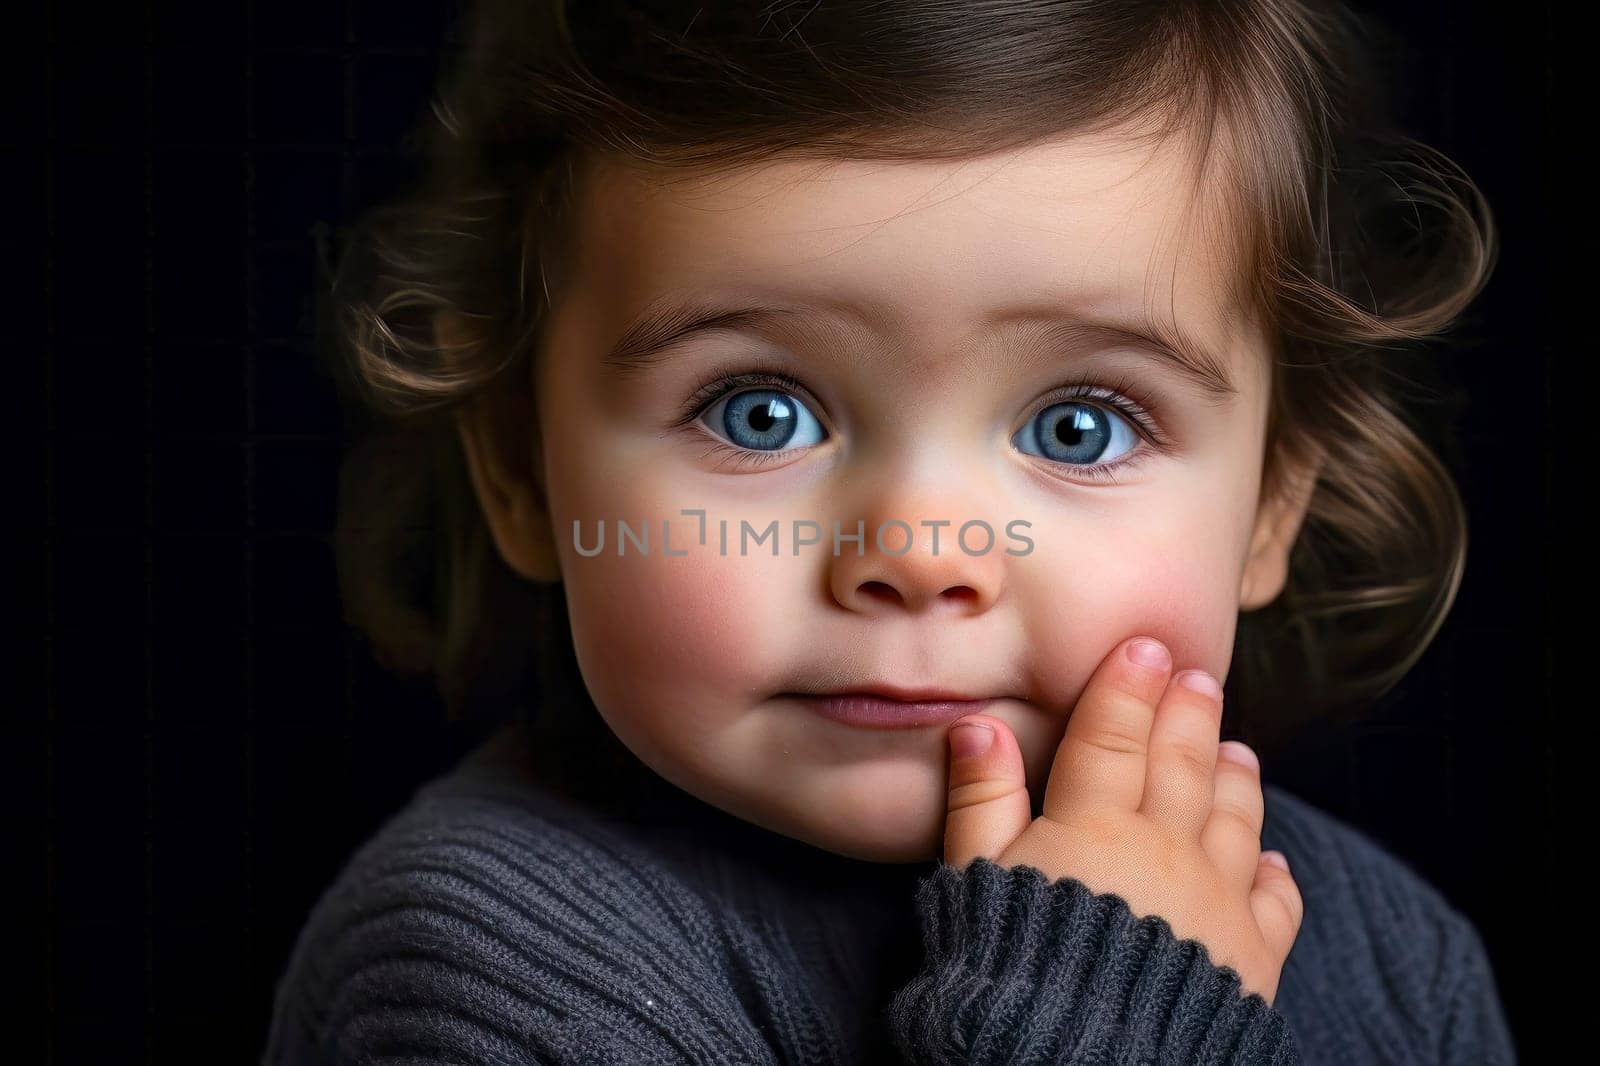 Captivating portrait of an adorable child with chubby cheeks